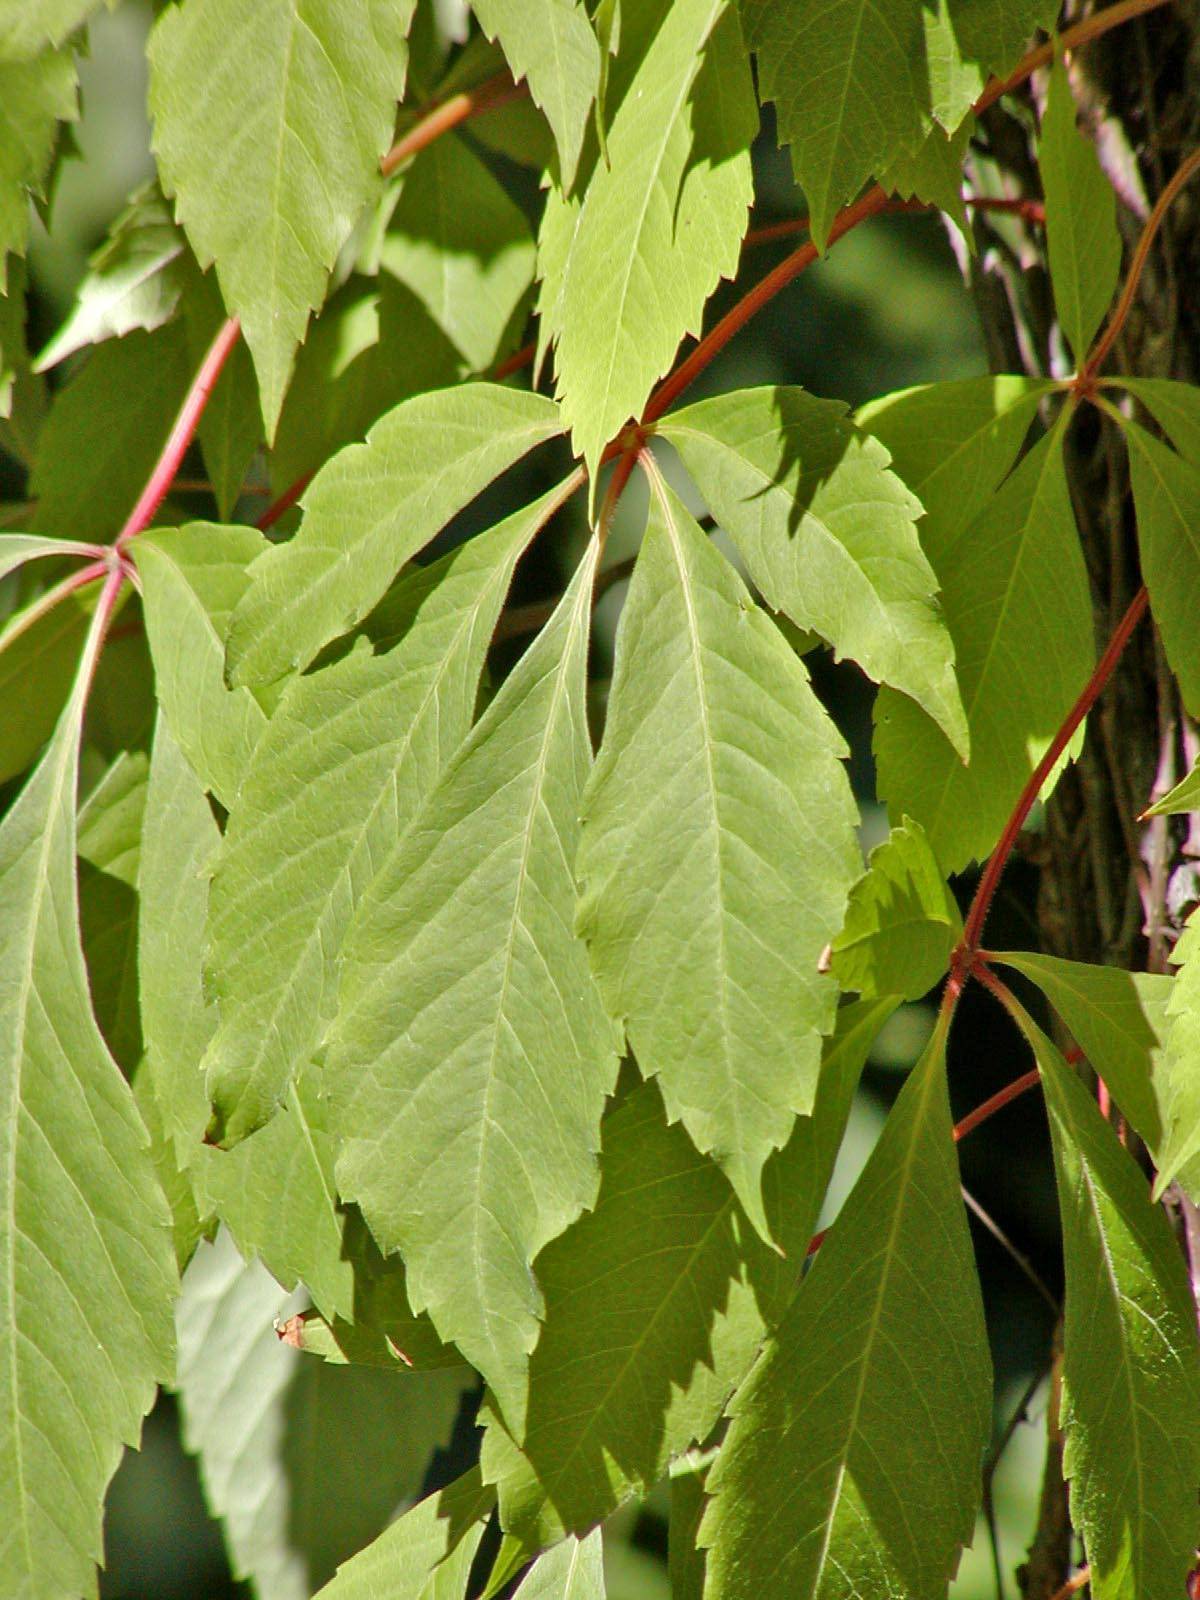 ovate, green, serrated leaves with red, feathery stems 